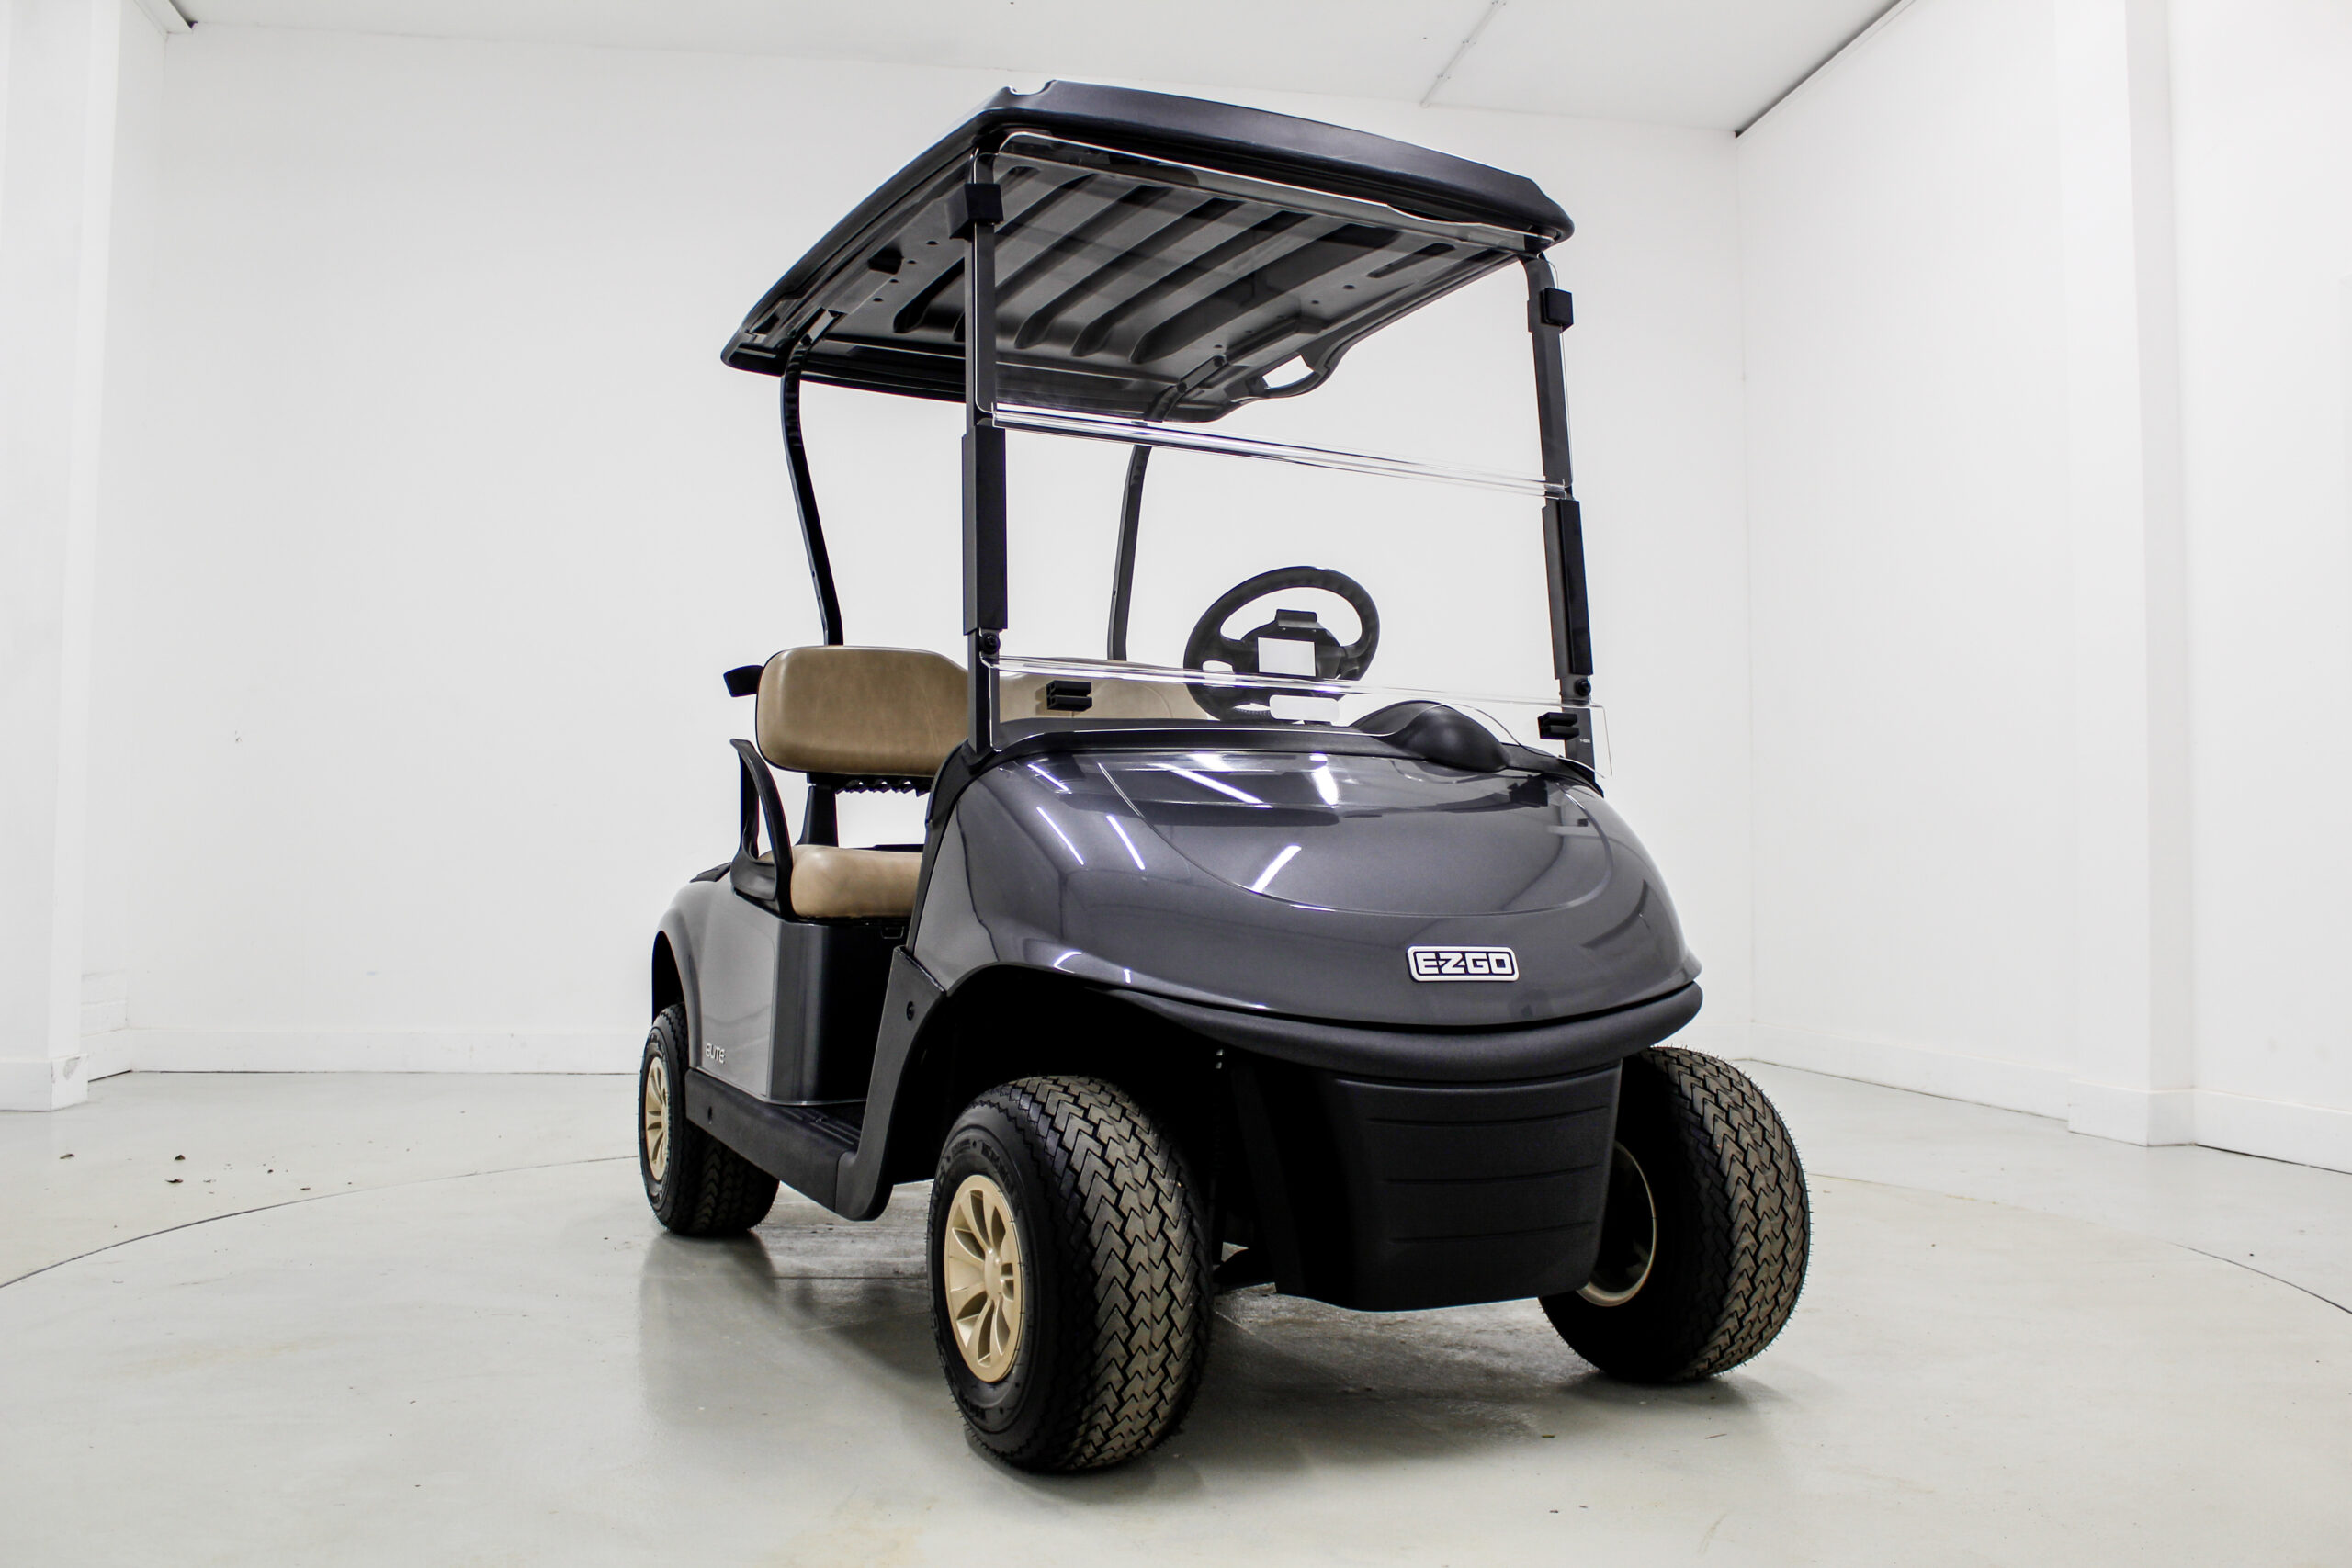 Second hand golf buggies for sale